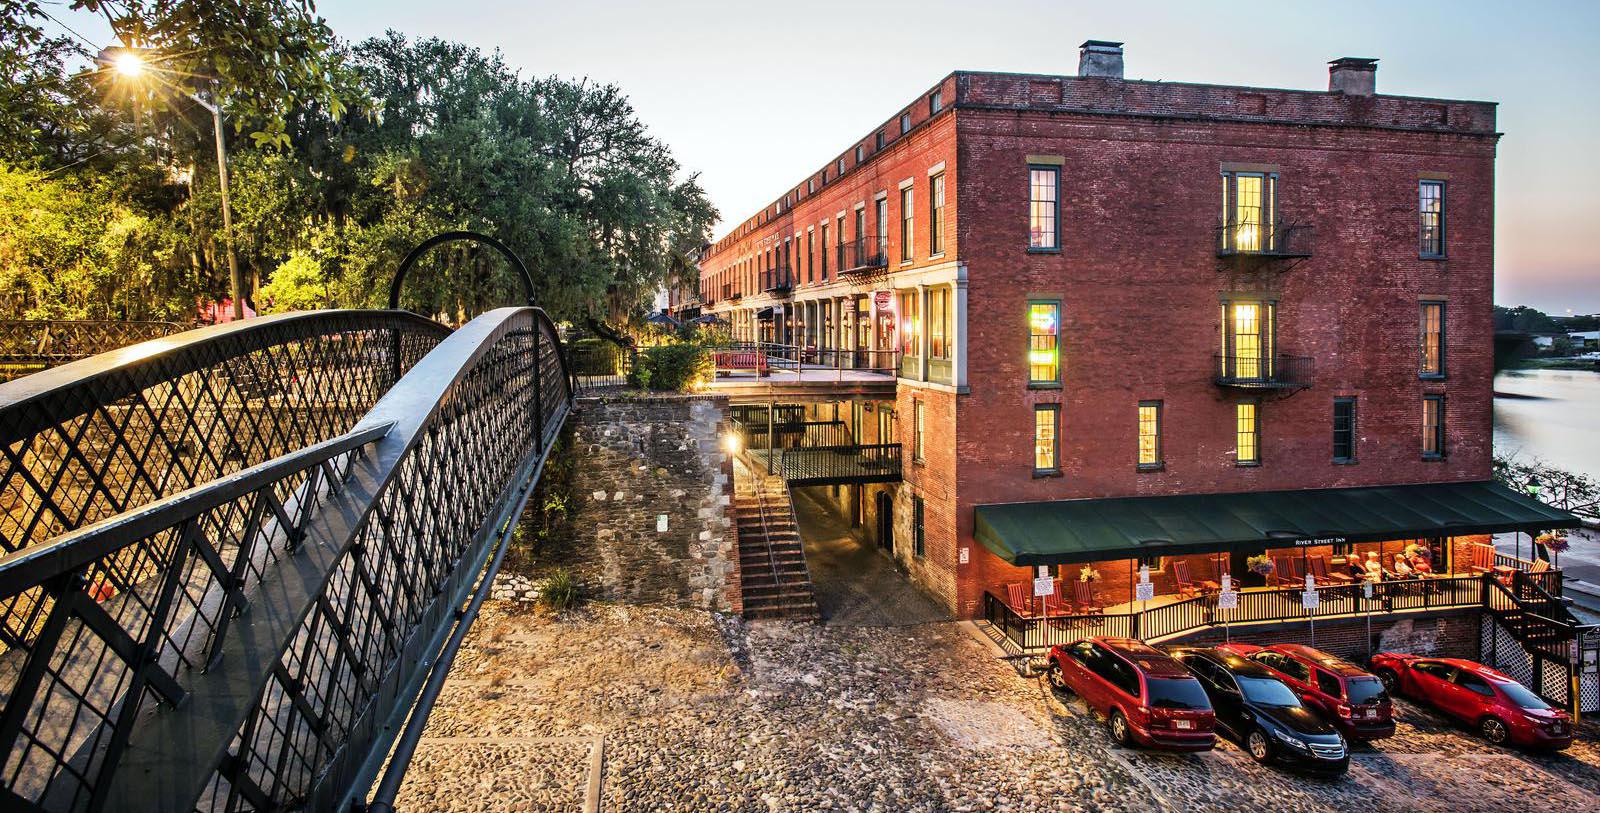 Image of Exterior River Street Inn, 1817, Member of the Historic Hotels of America, in Savannah, Georgia, Discover